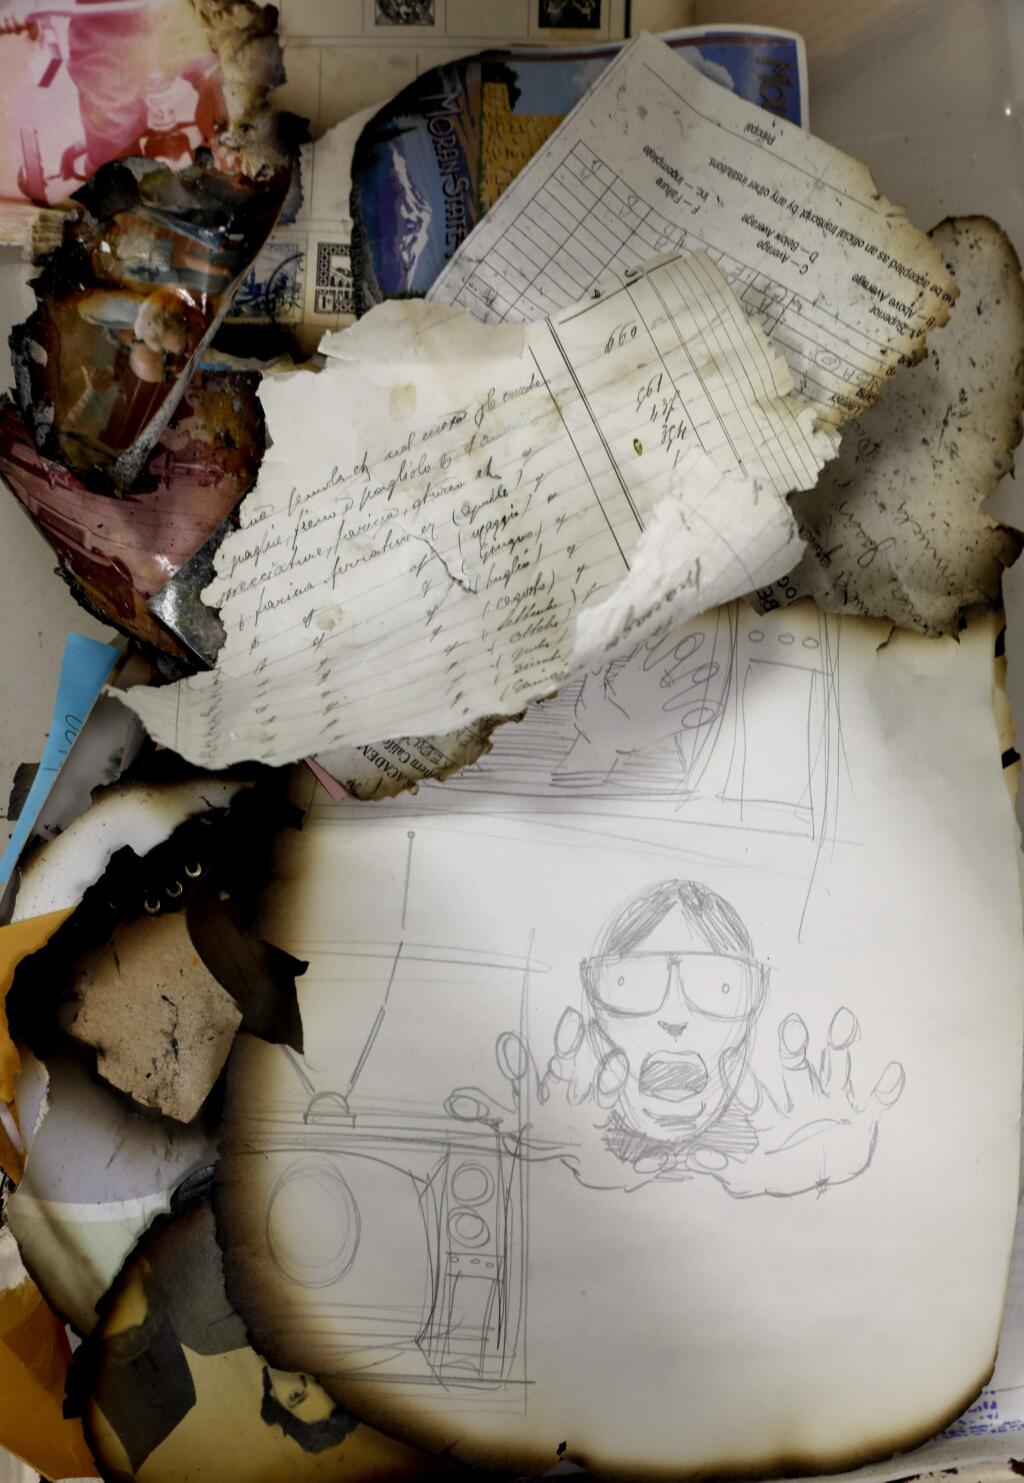 Photographs and papers damaged by the recent fires have been found and sent to Donald Laird, chair of the computer studies department, and his son, Sutter, who are collecting them and working to reunite them with their owners. Photo taken in his classroom at the Santa Rosa Junior College in Santa Rosa, on Sunday, October 29, 2017. (BETH SCHLANKER/ The Press Democrat)